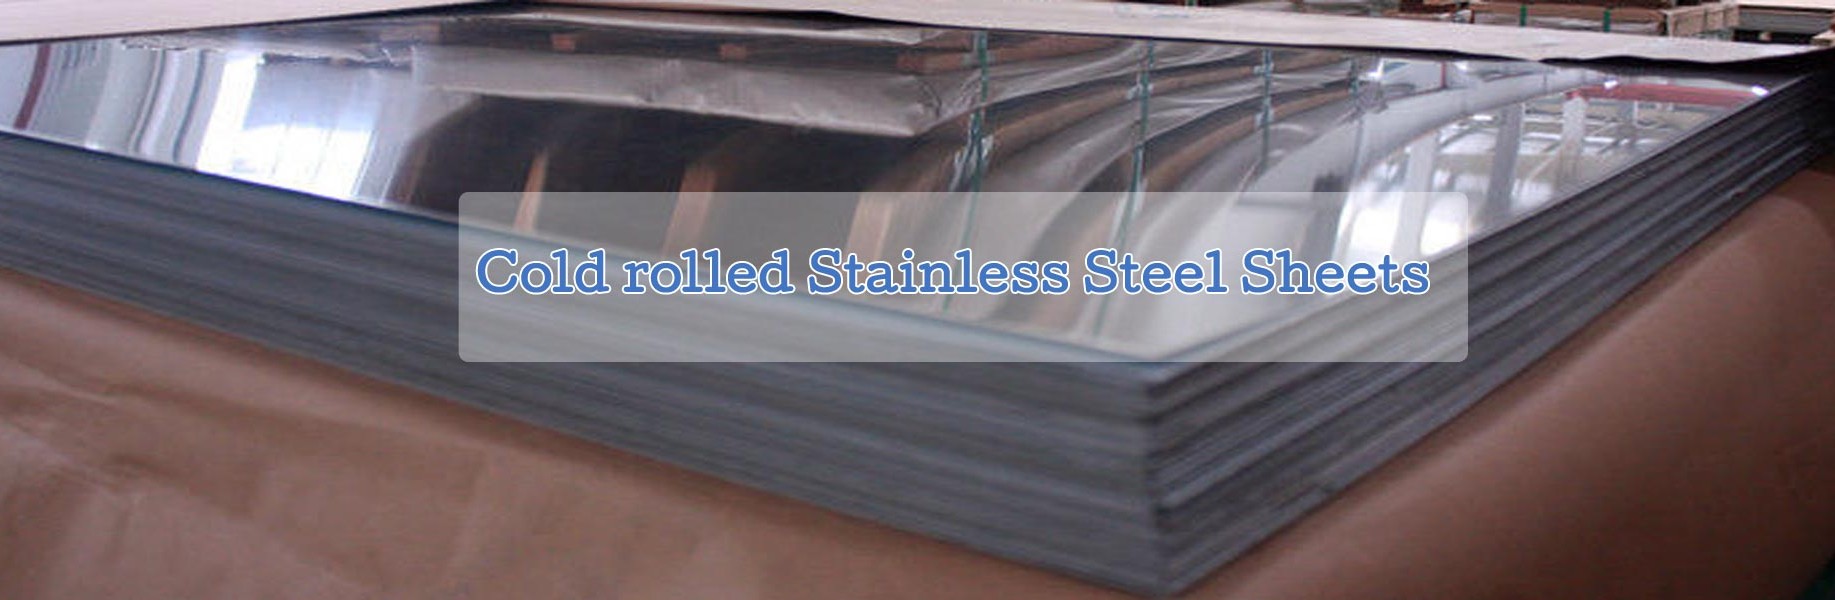 COLD ROLLED STAINLESS STEEL SHEETS